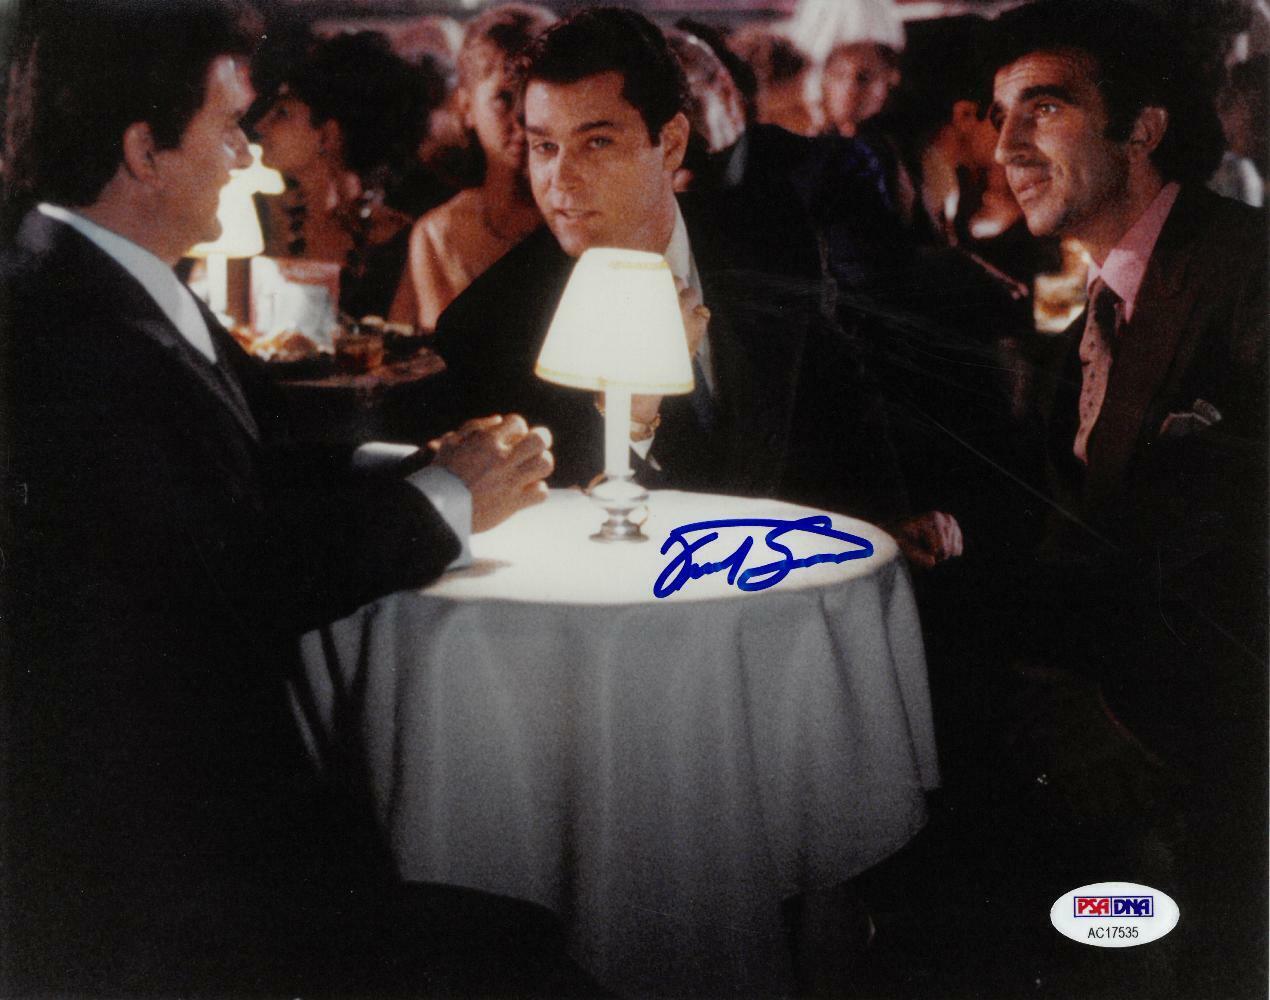 Frank Sivero Signed Goodfellas Authentic Autographed 8x10 Photo Poster painting PSA/DNA #AC17535